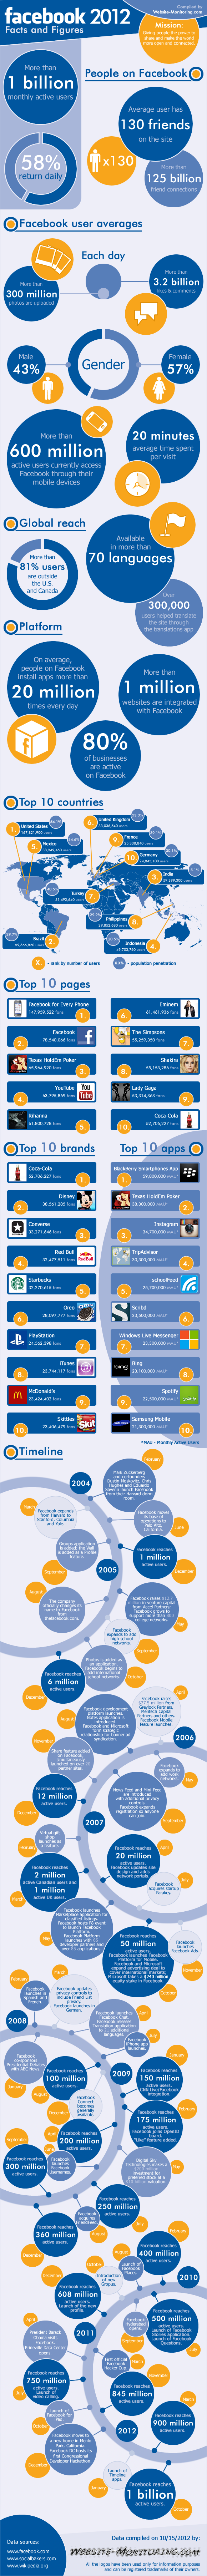 Top 10 Apps, Pages, Brands on Facebook